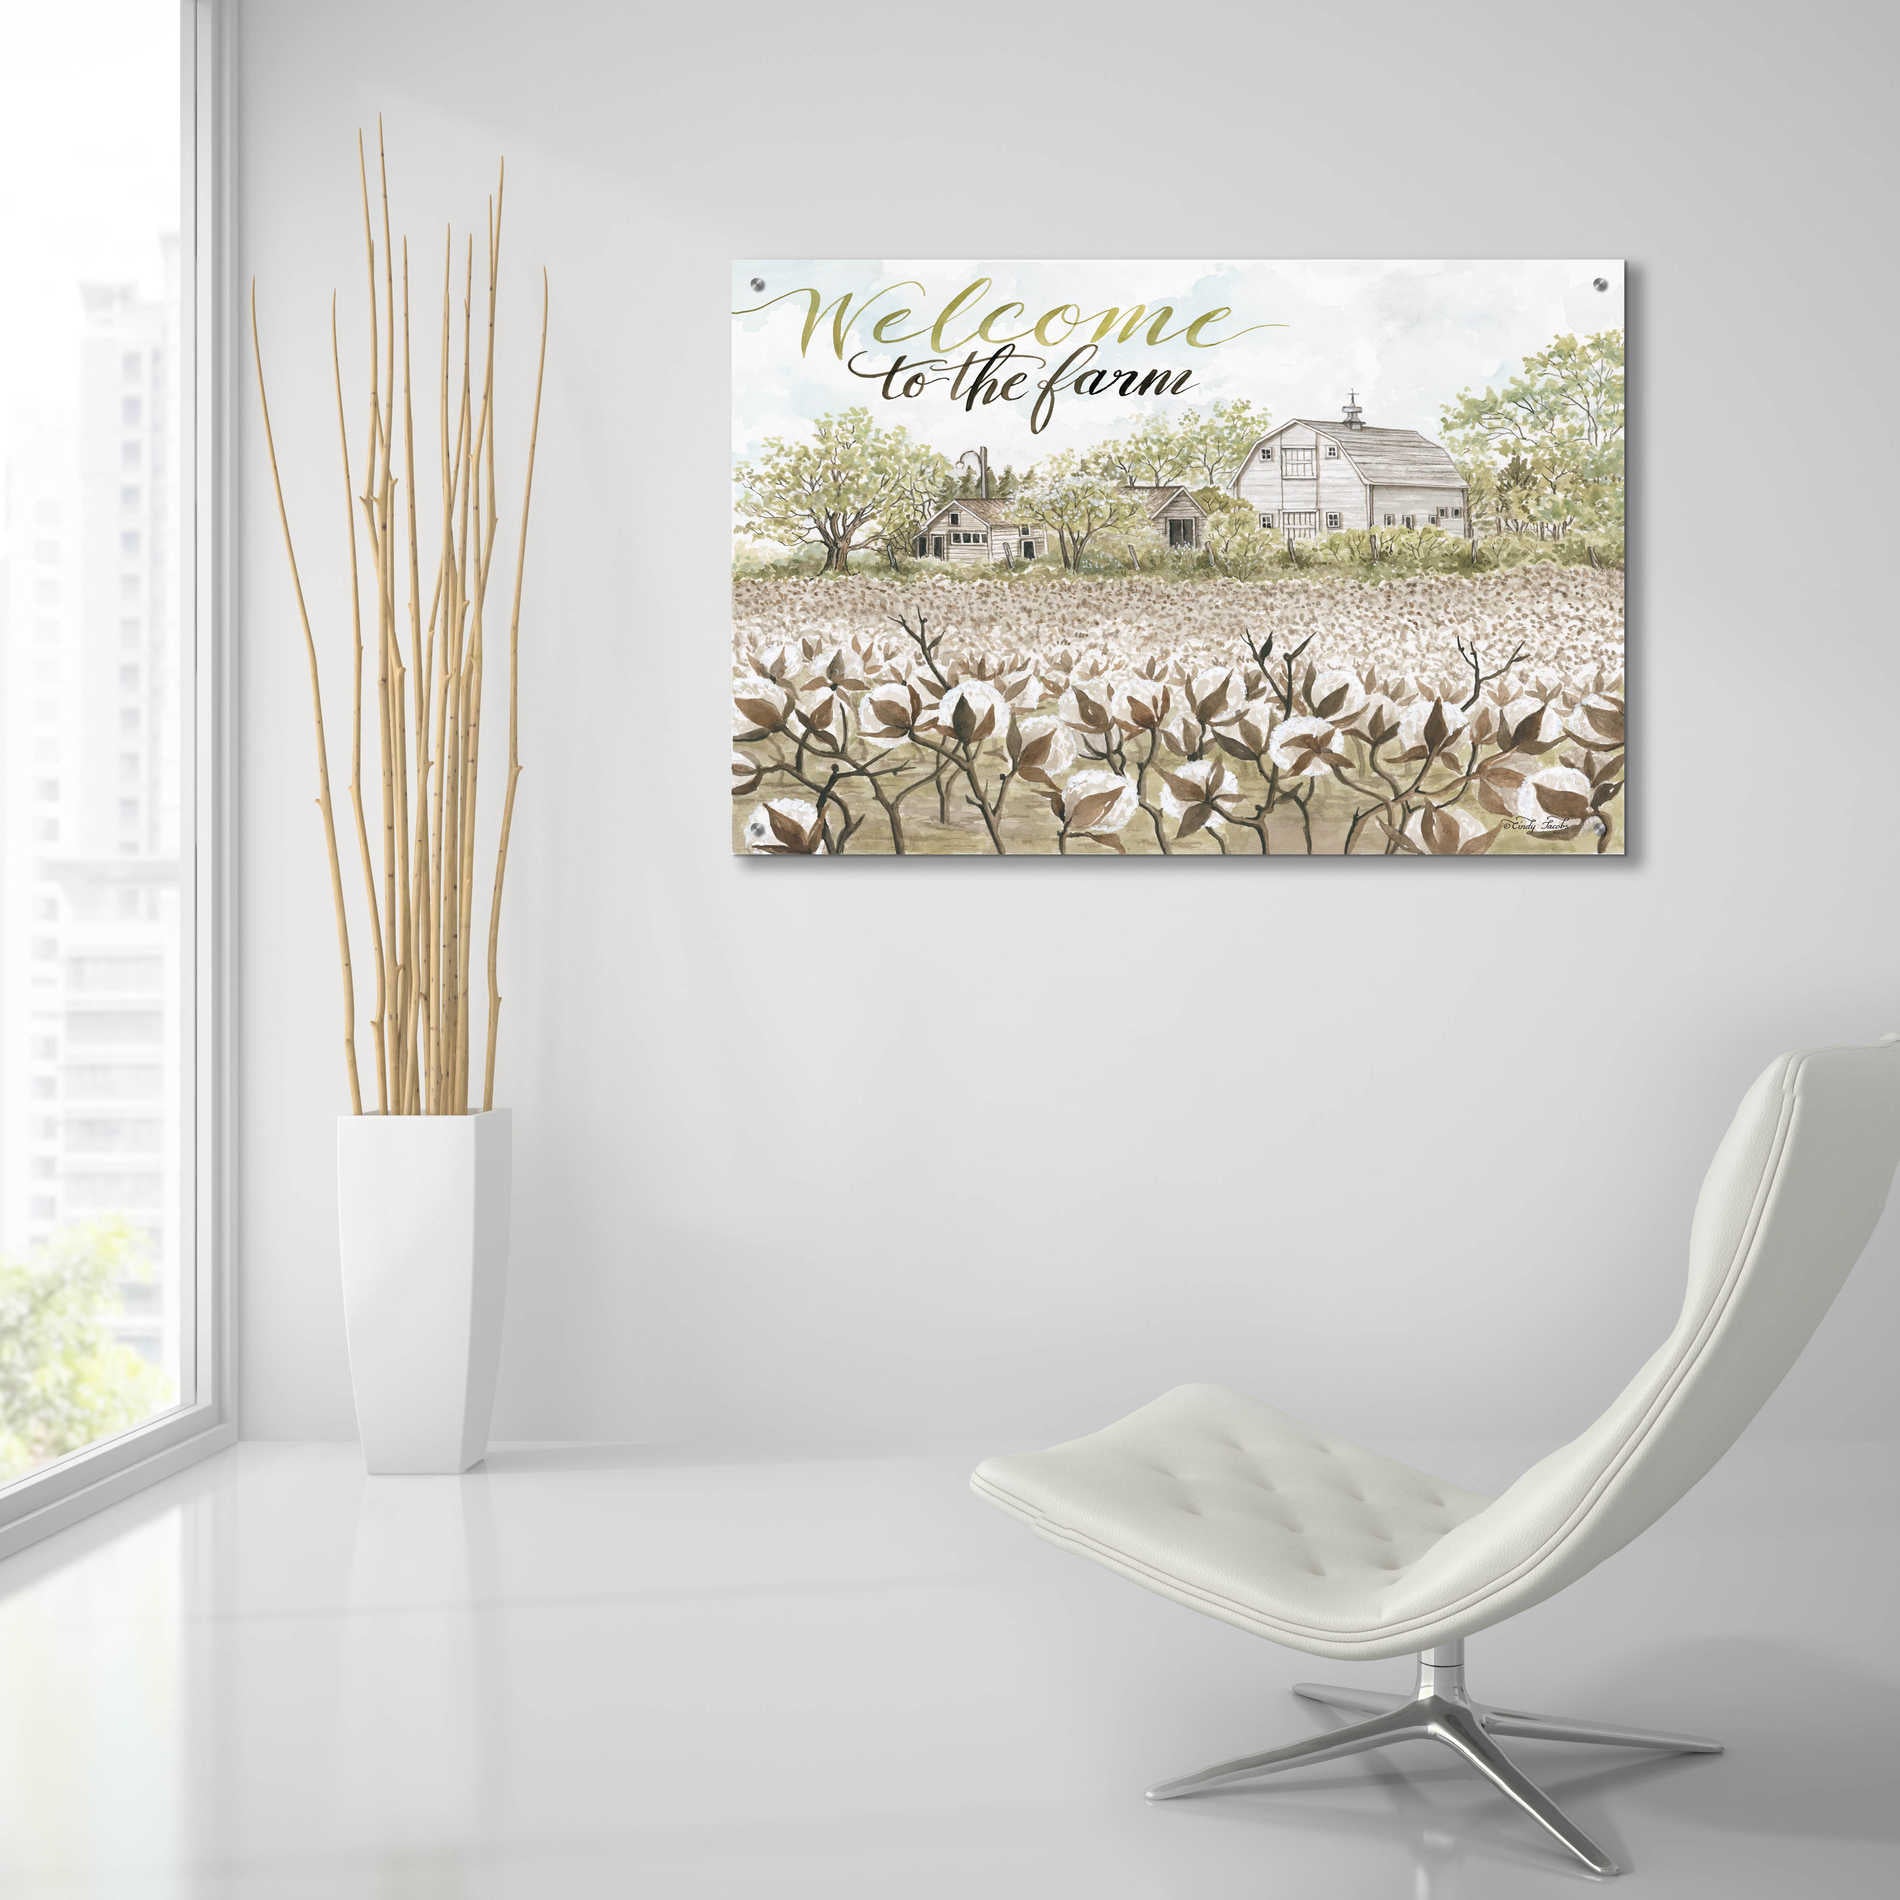 Epic Art 'Welcome to the Farm' by Cindy Jacobs, Acrylic Glass Wall Art,36x24